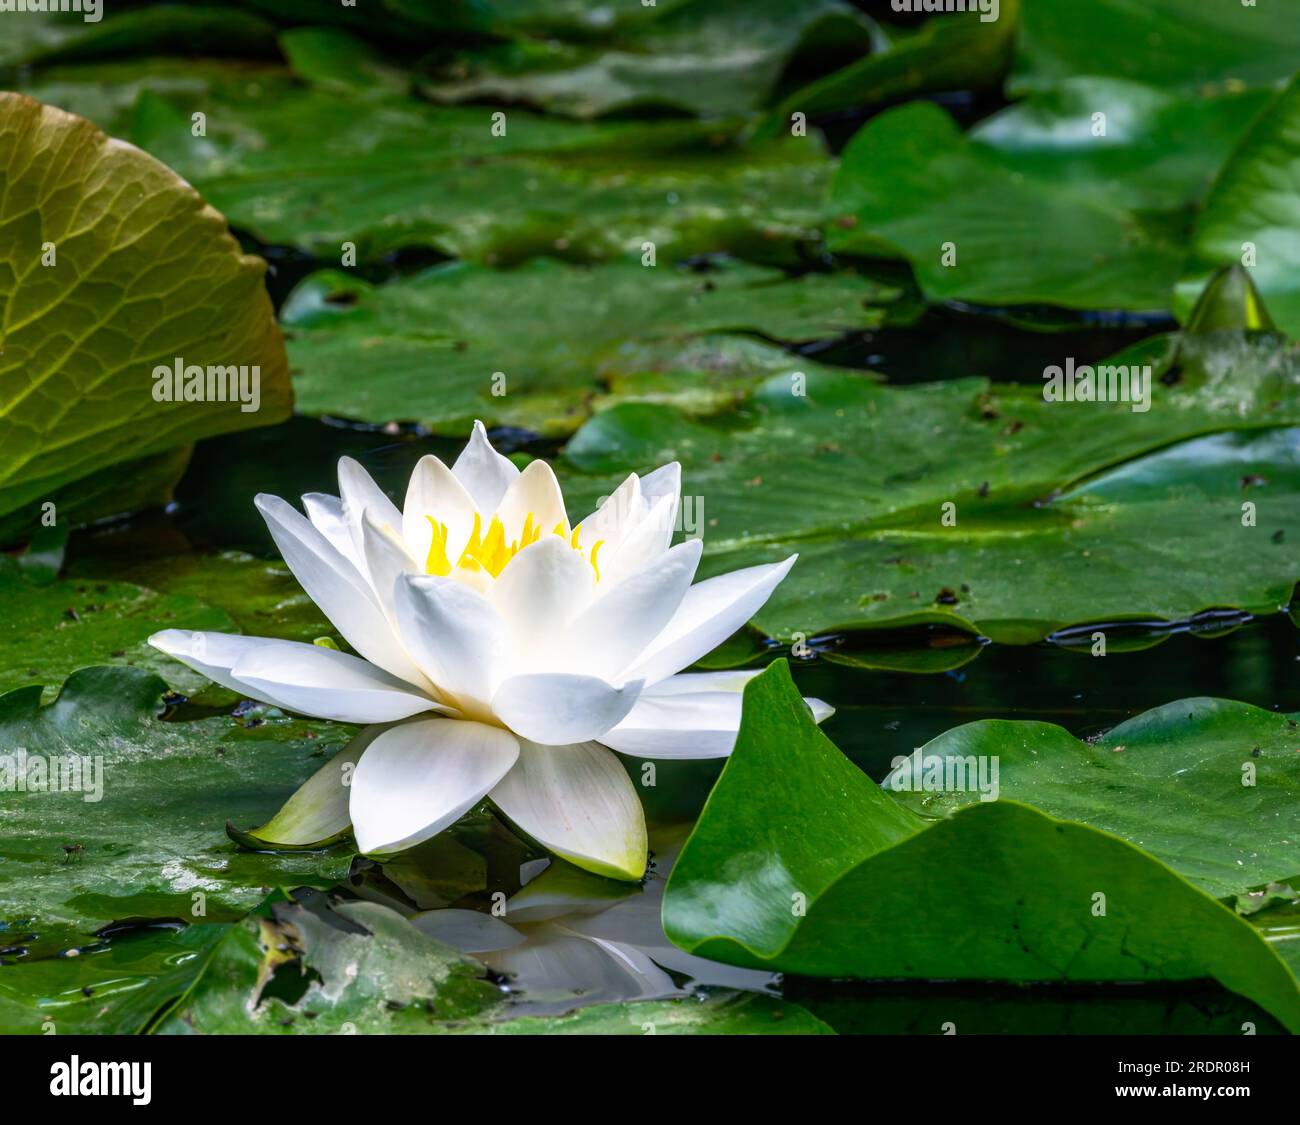 Closeup of a white water lilly blossom in a pond Stock Photo